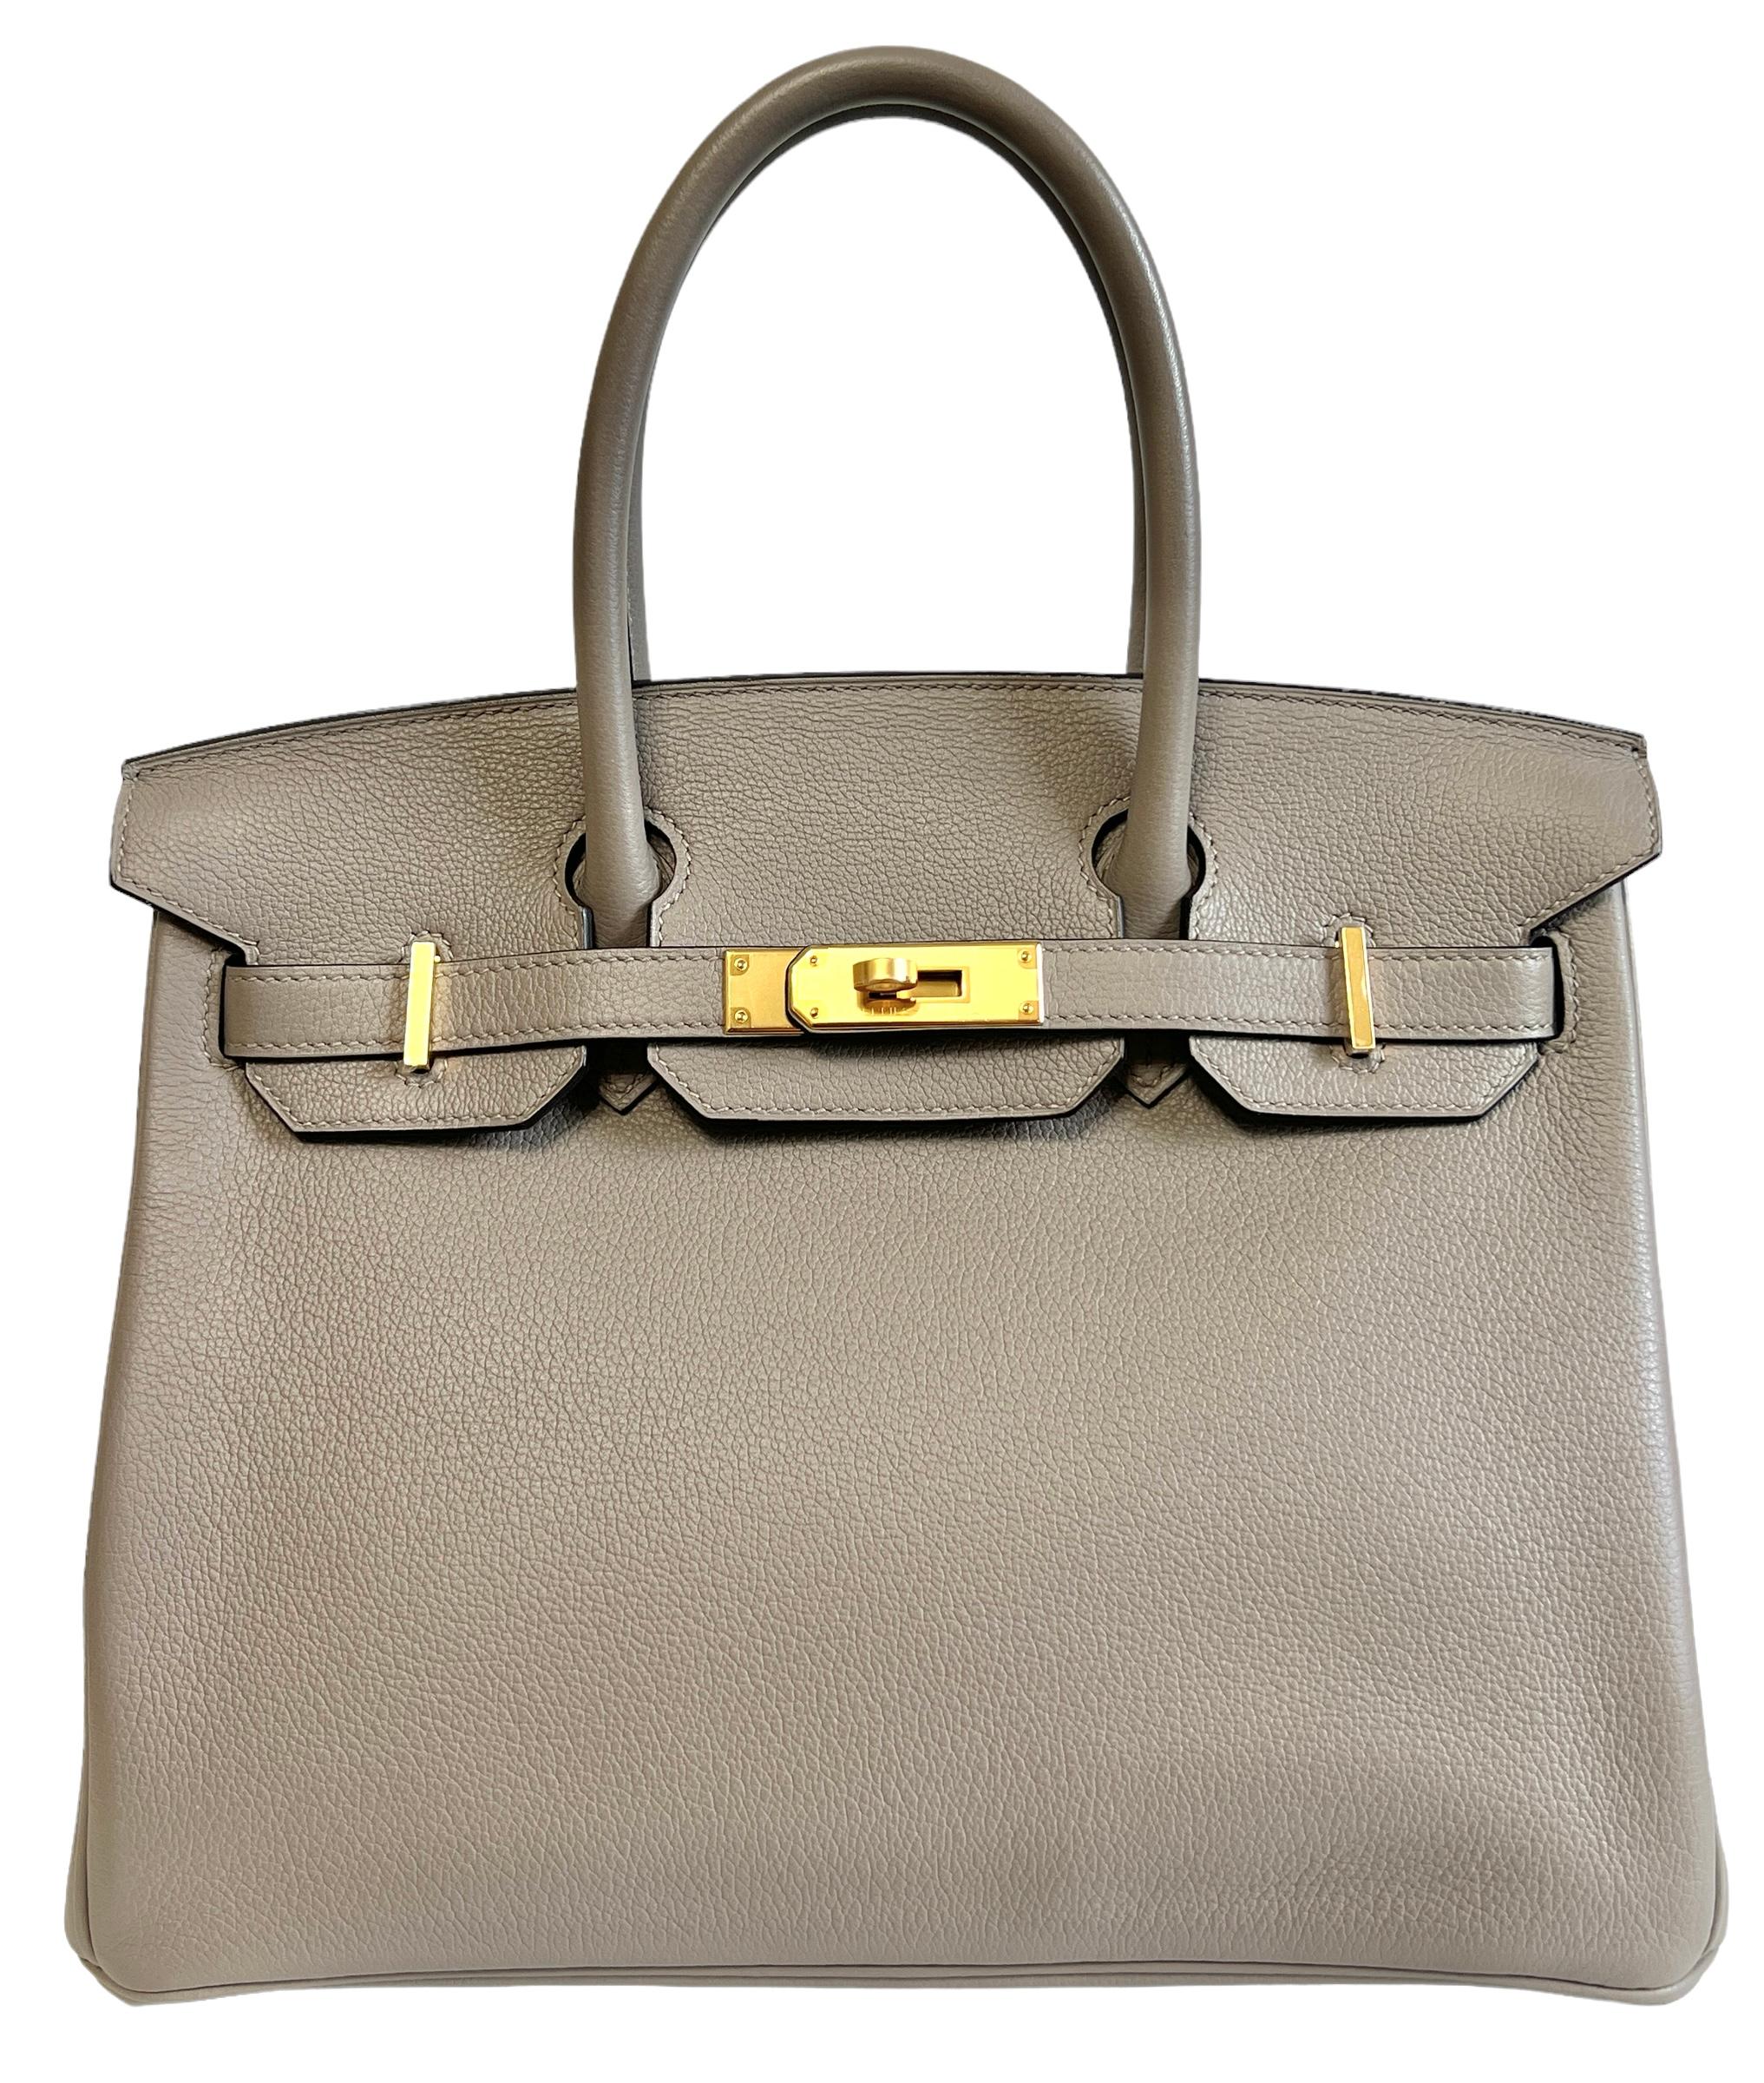 Absolutely Stunning Rare 2020 Hermes Birkin 30 Gris Asphalt Novillo Leather complimented by Gold Hardware. Like New Condition with plastic on all hardware. Y Stamp 2020. 

Shop with Confidence from Lux Addicts. Authenticity Guaranteed! 
